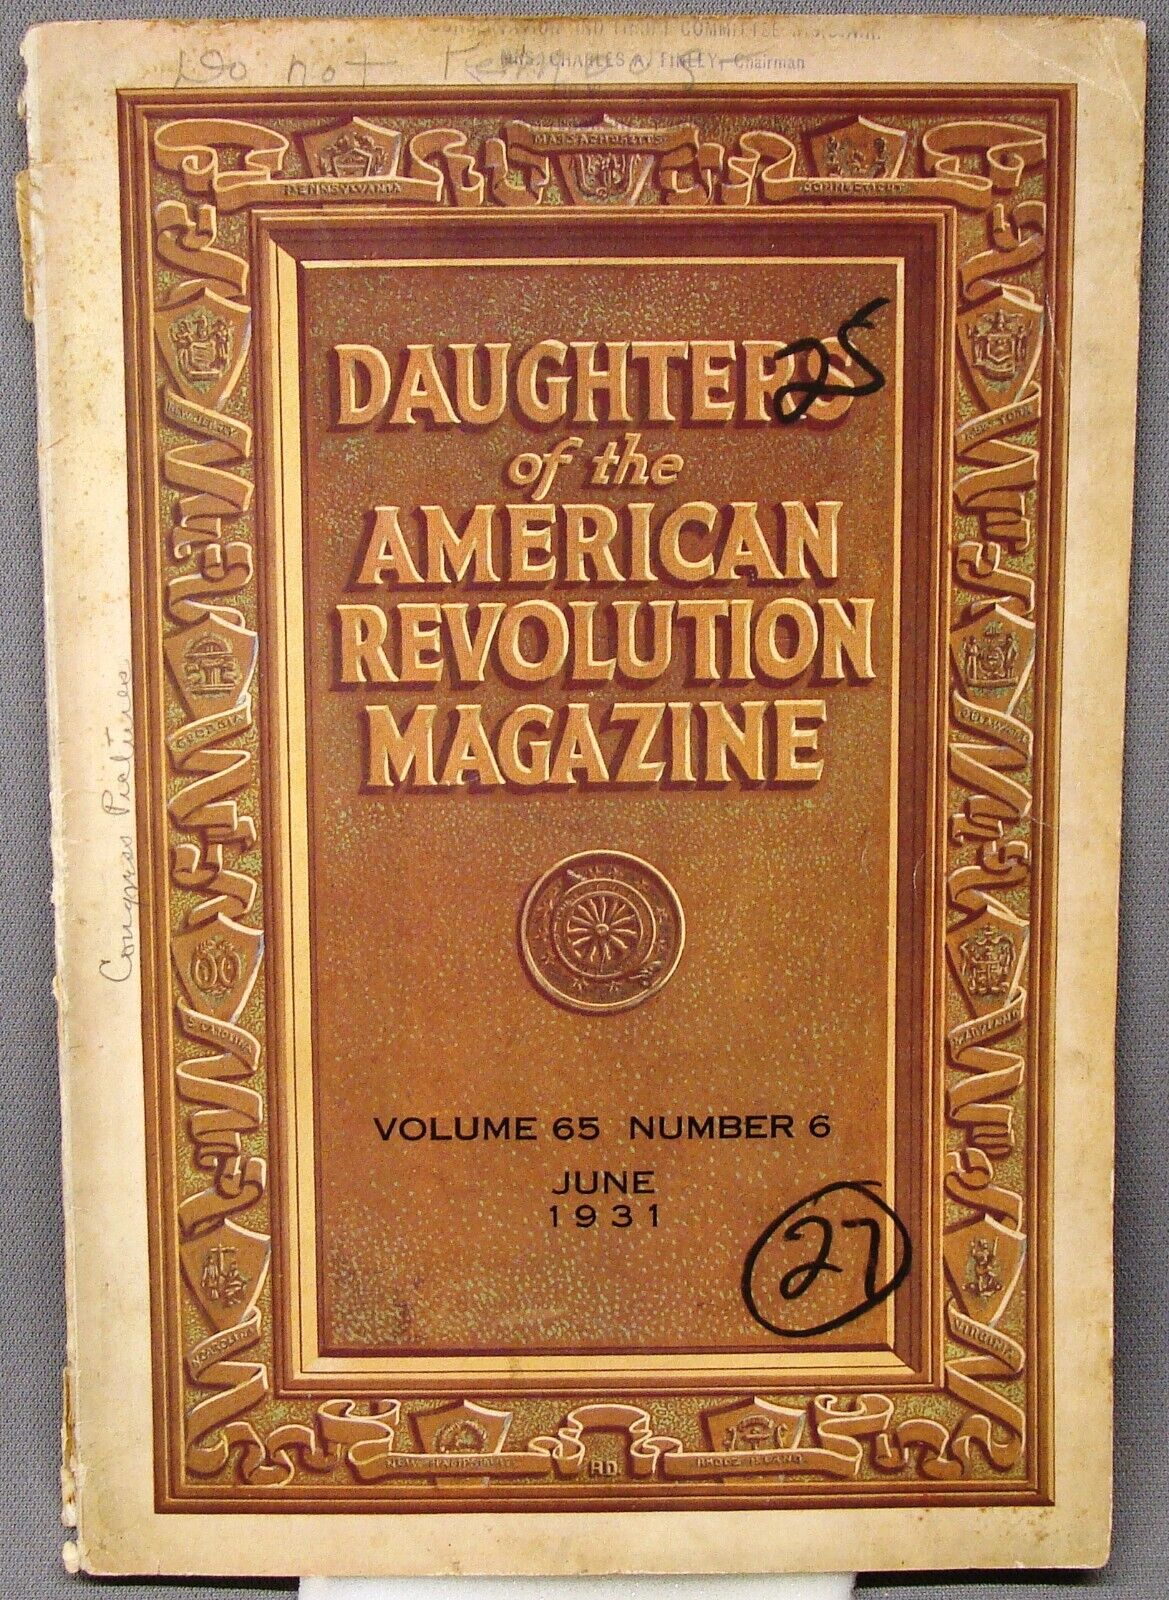 1931 Daughters of the American Revolution magazine